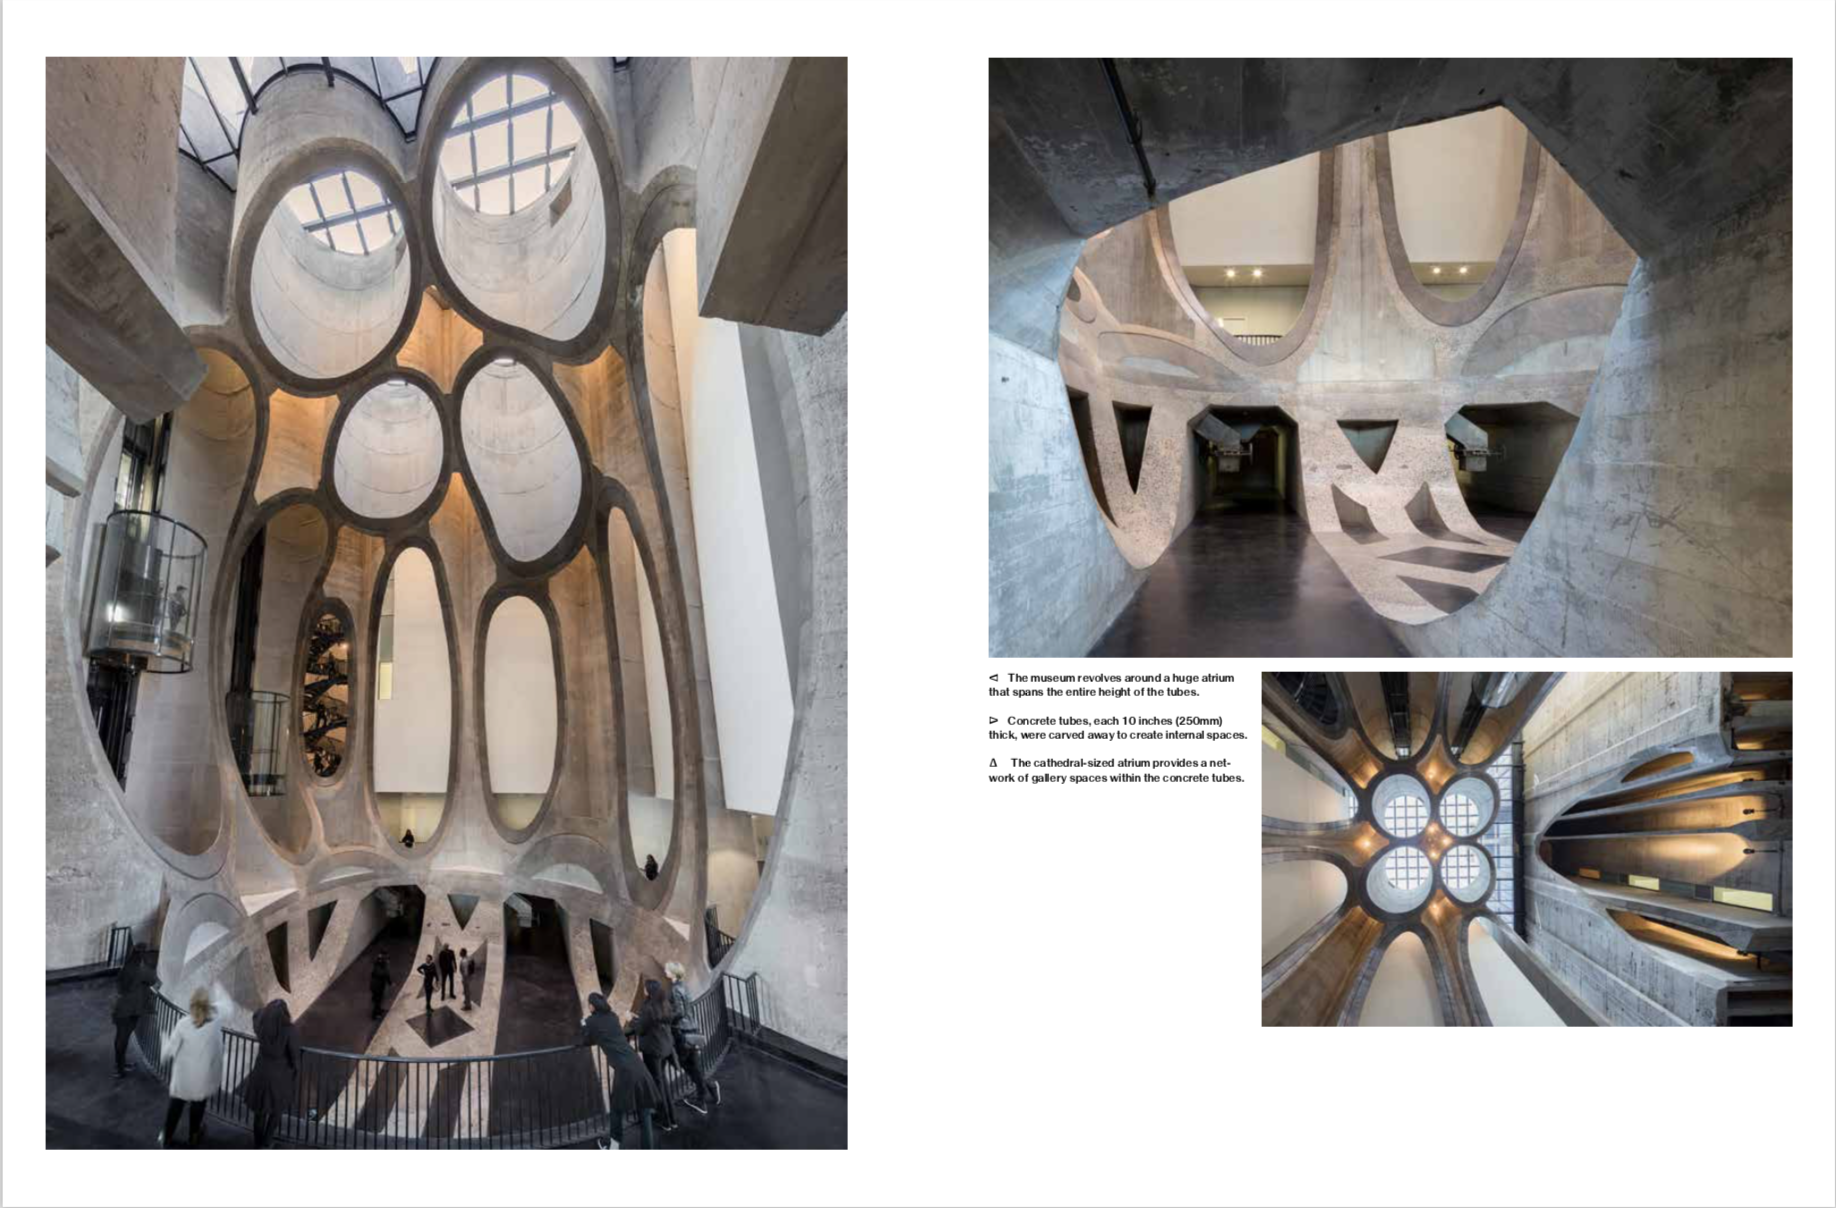 By Dan Barasch from Ruin and Redemption in Architecture copyright Phaidon 2019